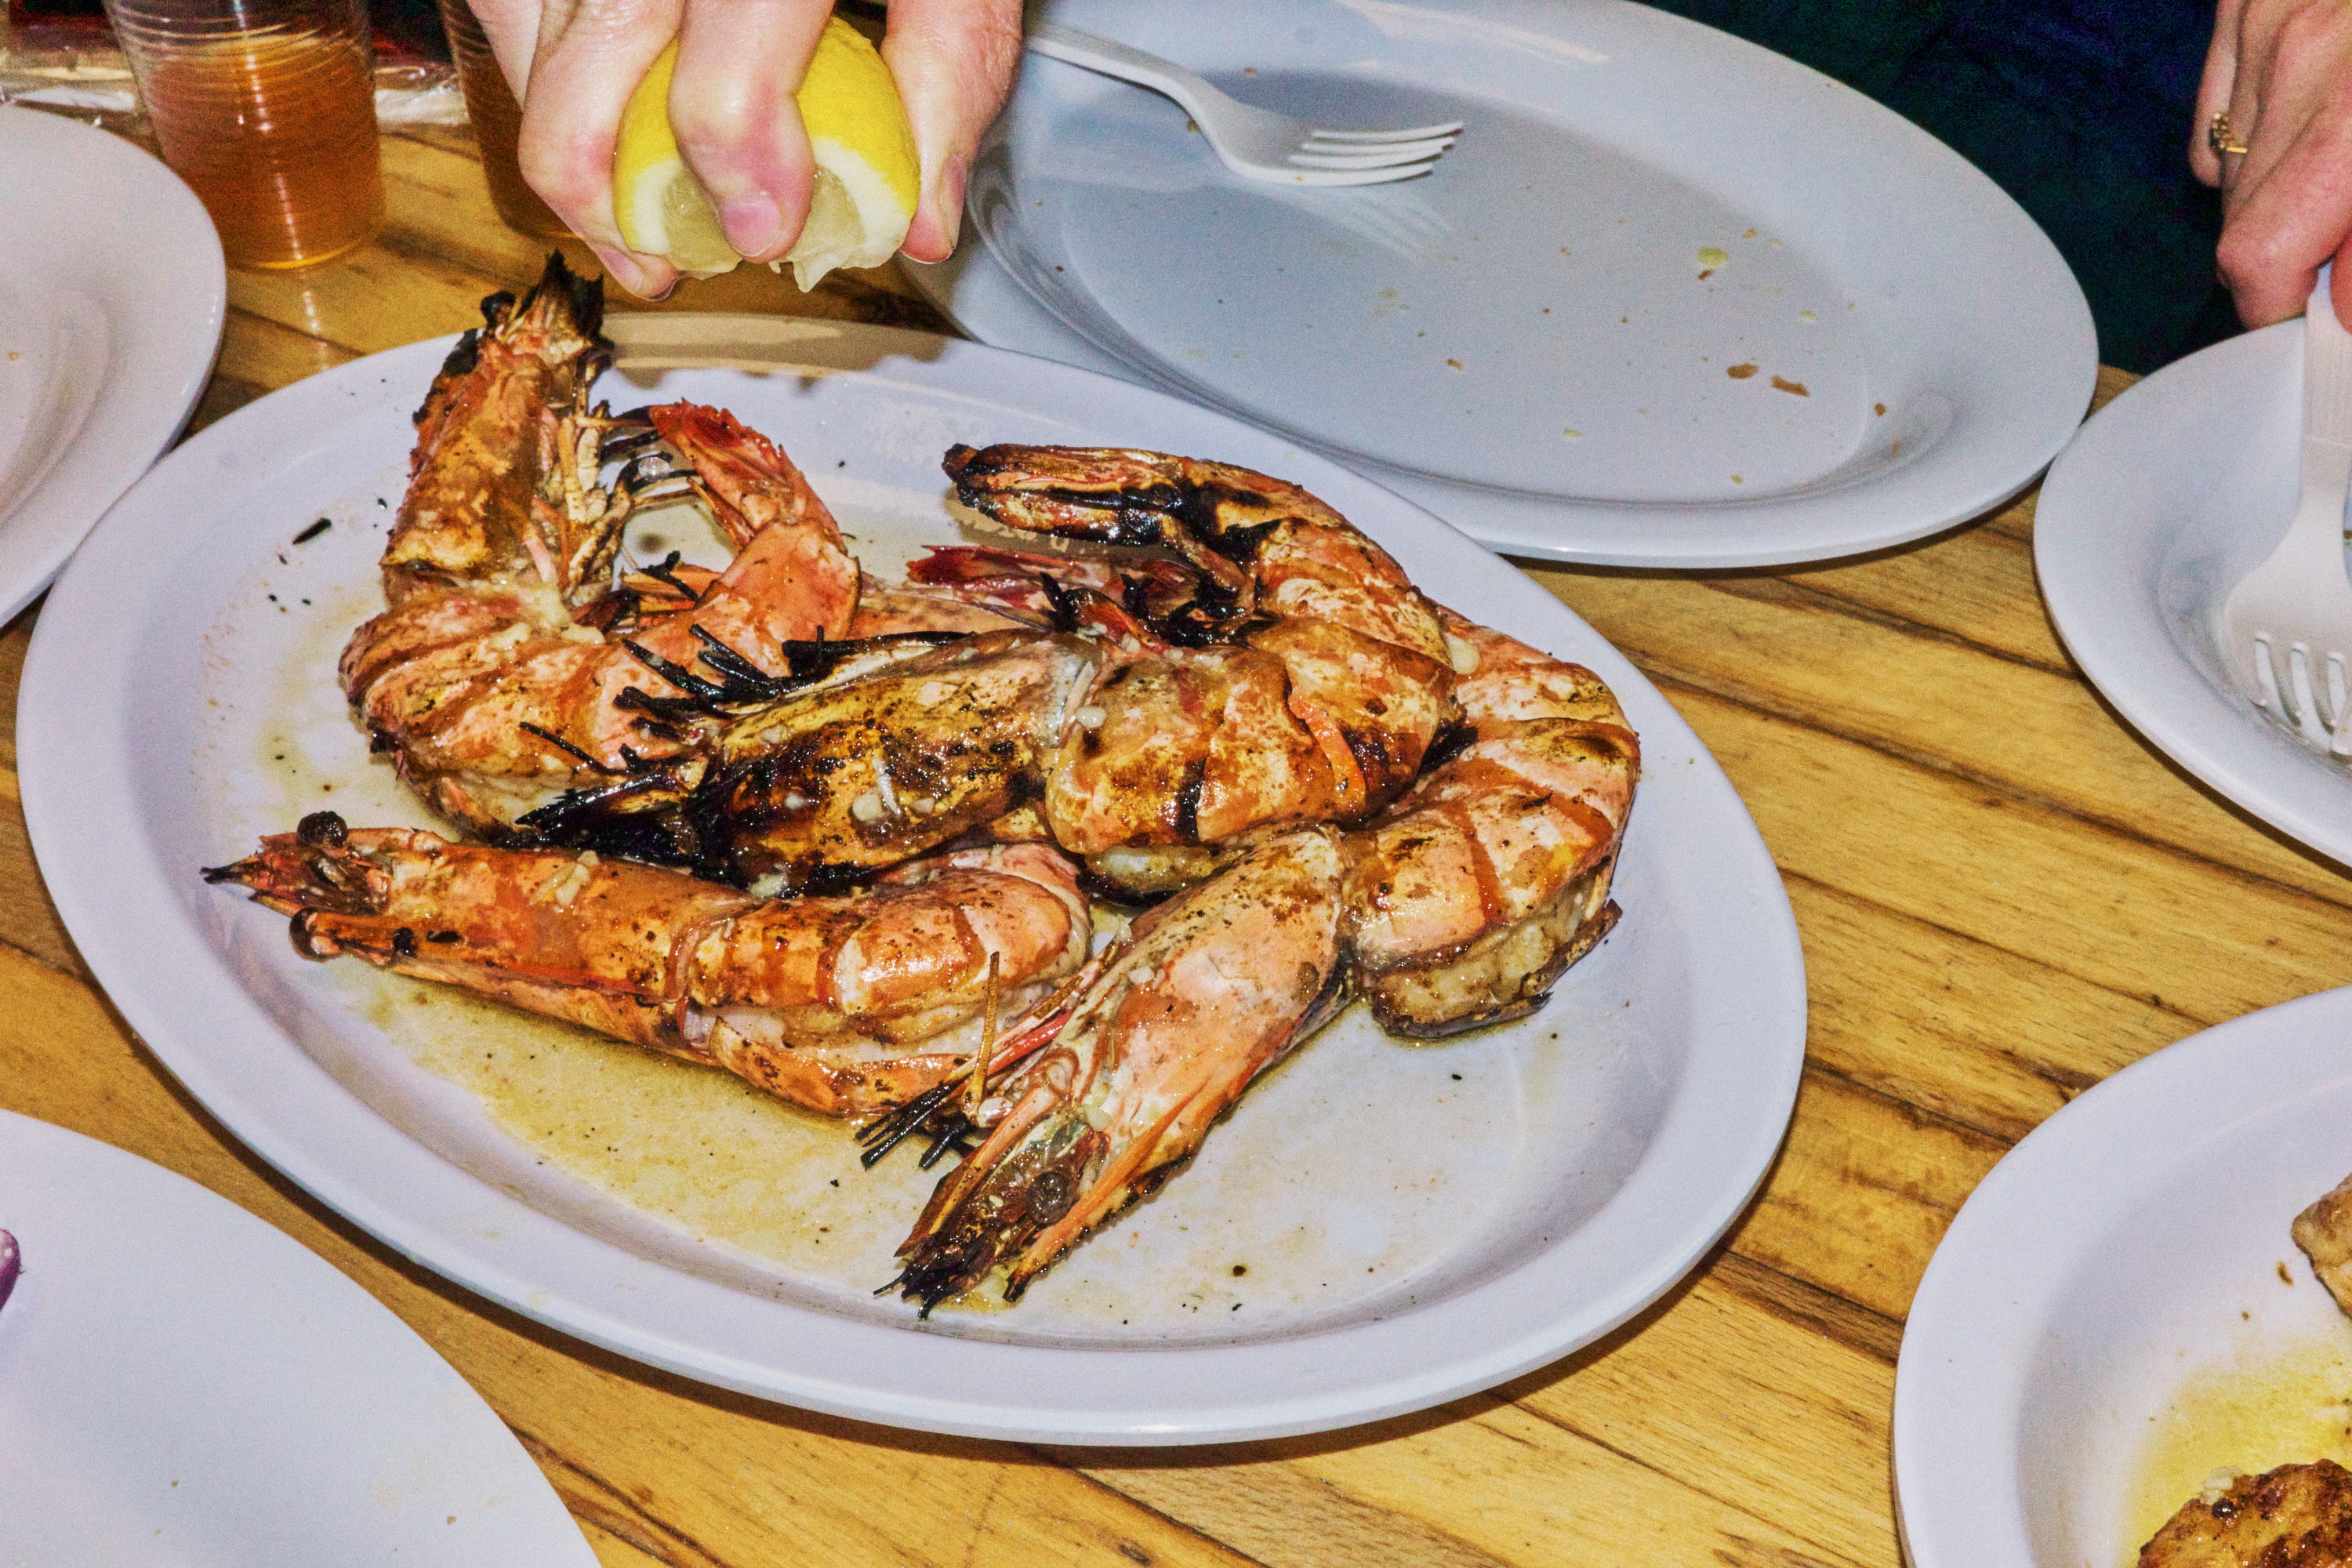 A hand squeezes a lemon wedge over a plate of grilled head-on shrimp.